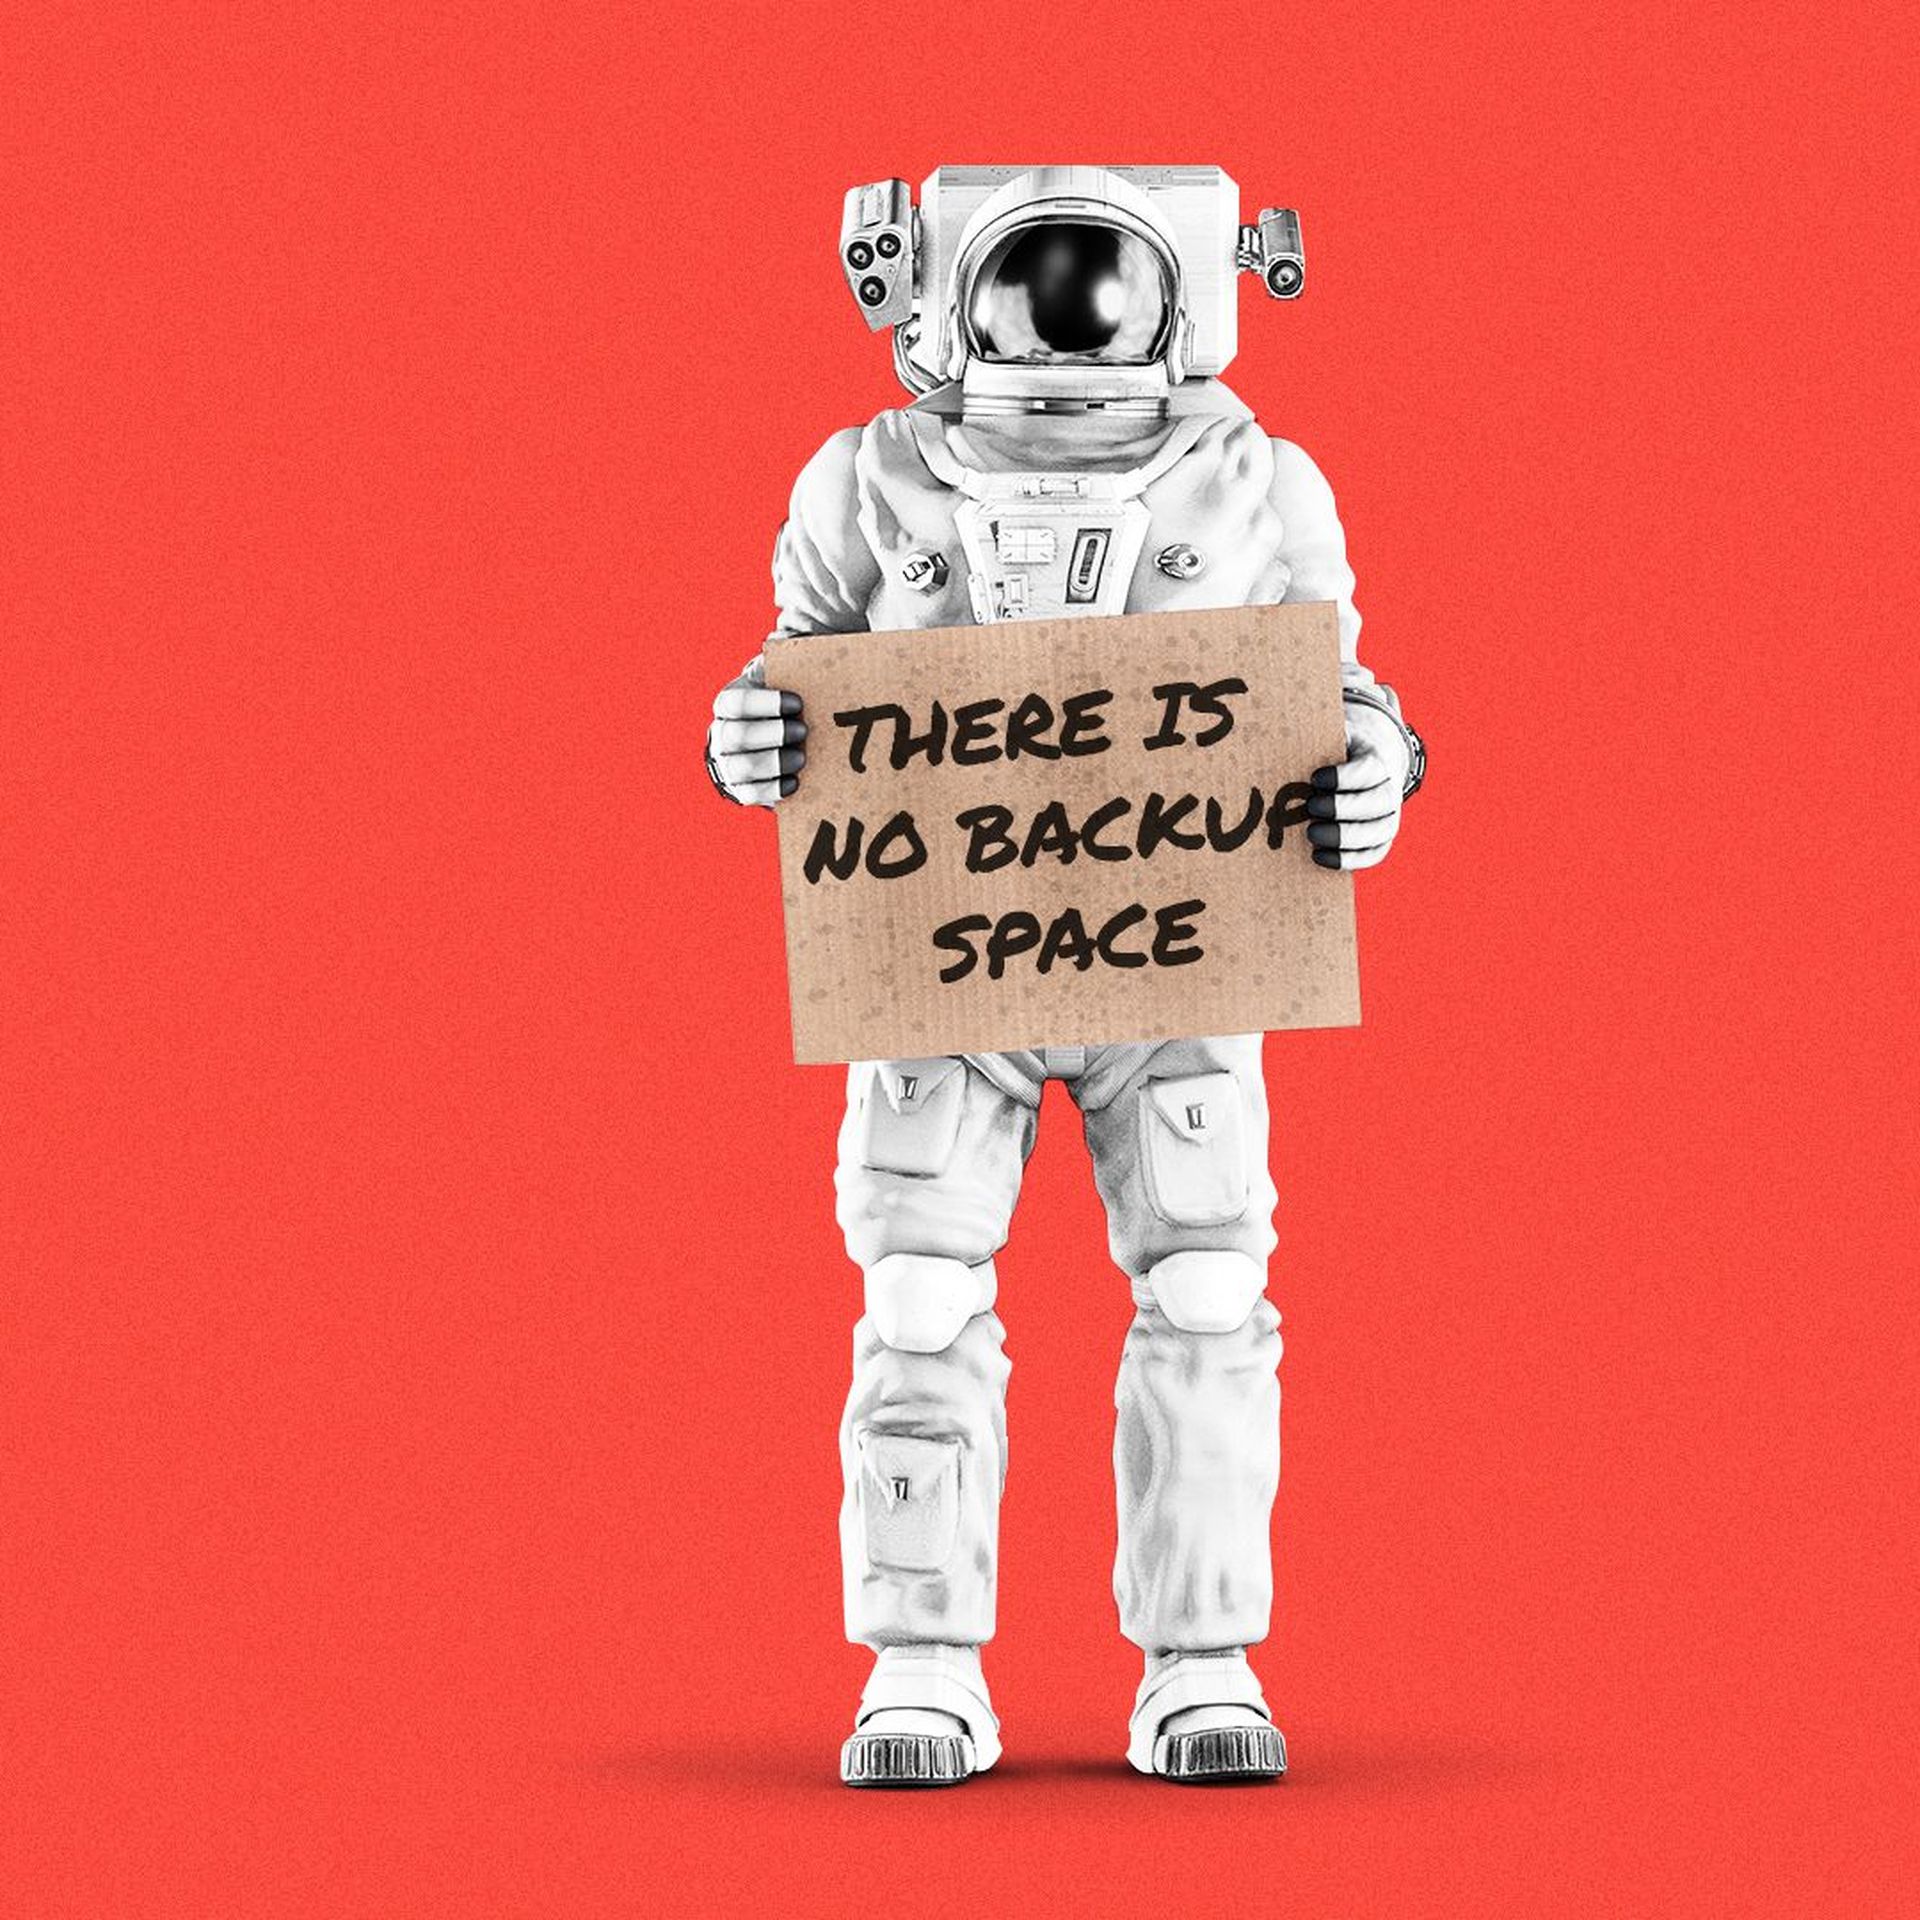 Illustration of an astronaut holding a cardboard sign that reads, "There is no backup space"  